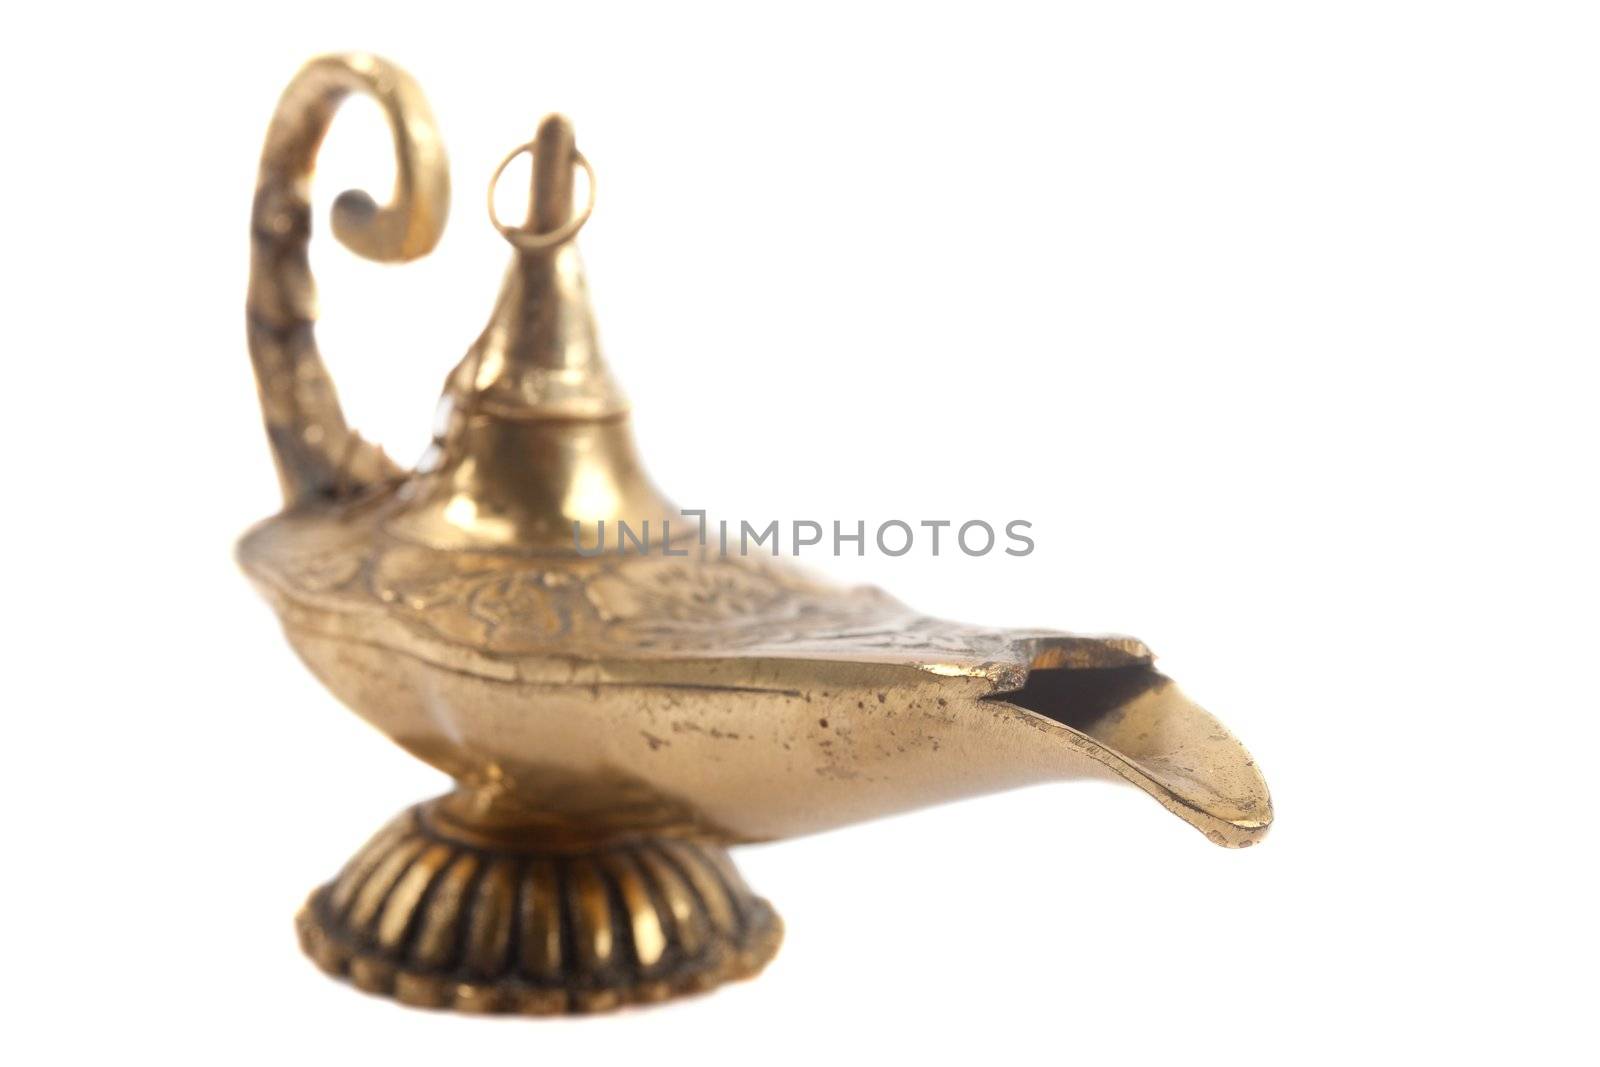 A golden magic lamp isolated on a white background. Image is at 21 megapixels.